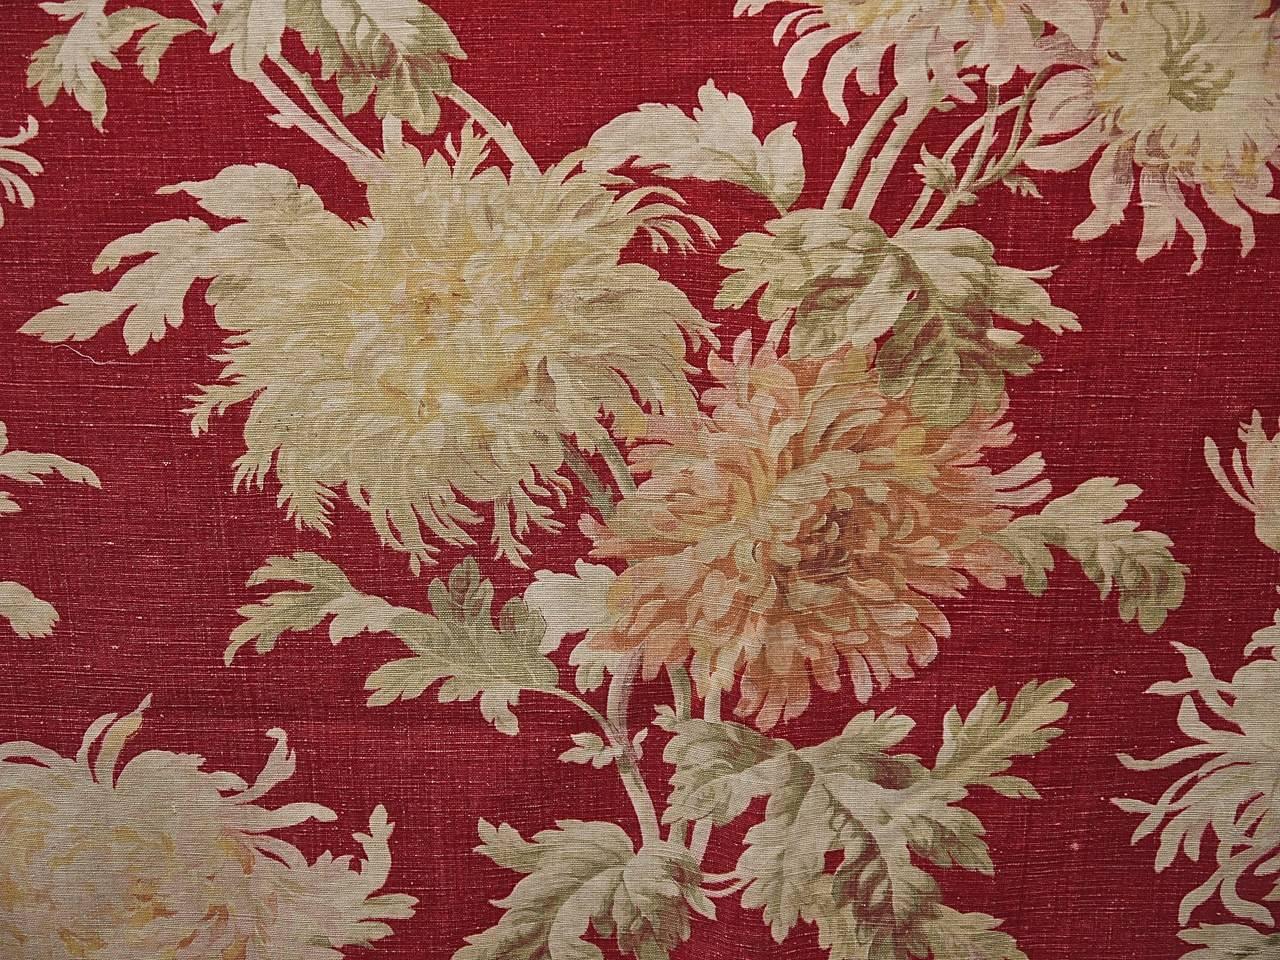 Late 19th Century French Large-Scale Floral on Red Cotton Throw 1